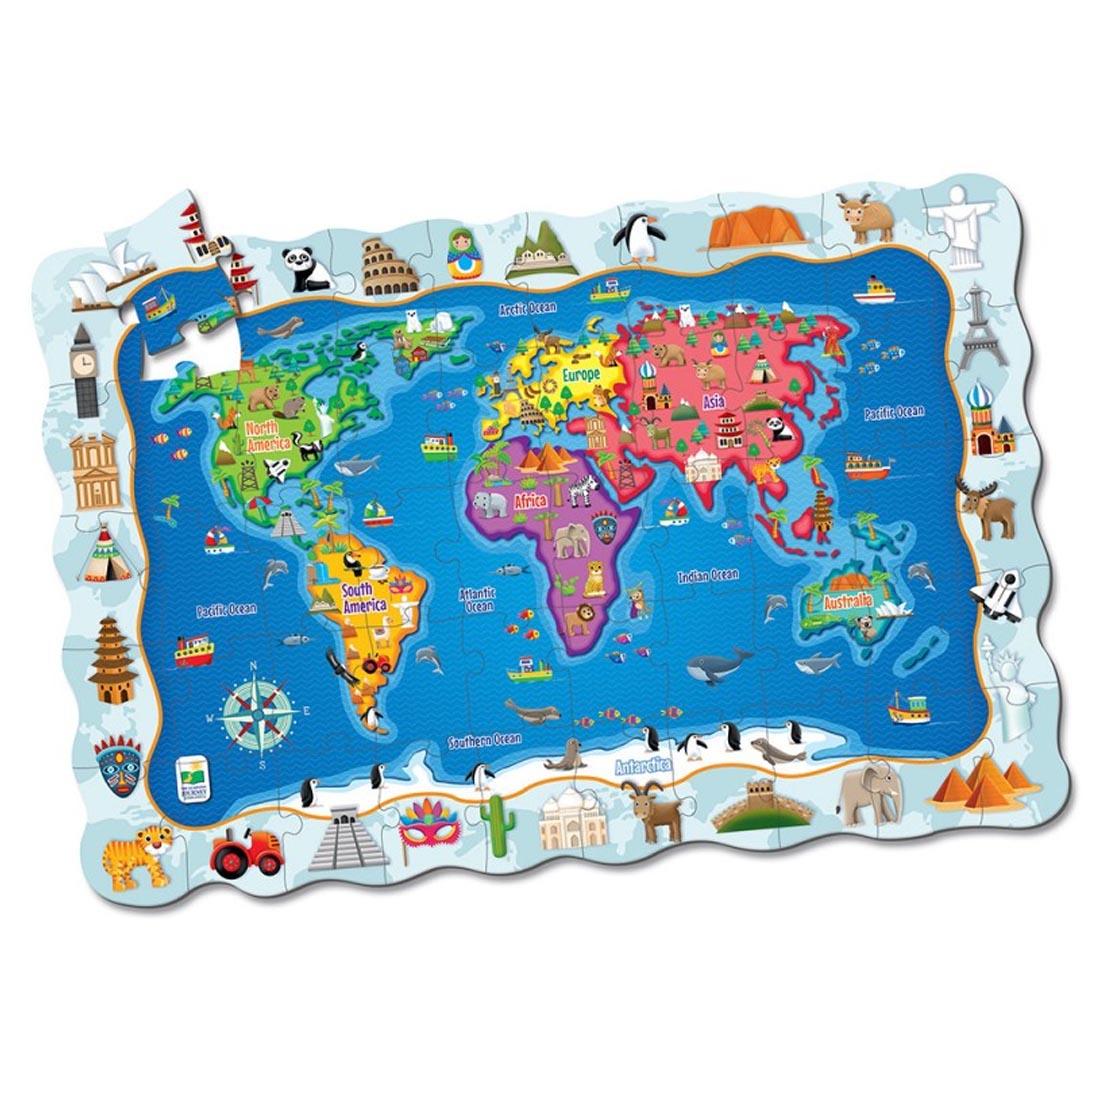 Puzzle Doubles! Find It! World by The Learning Journey